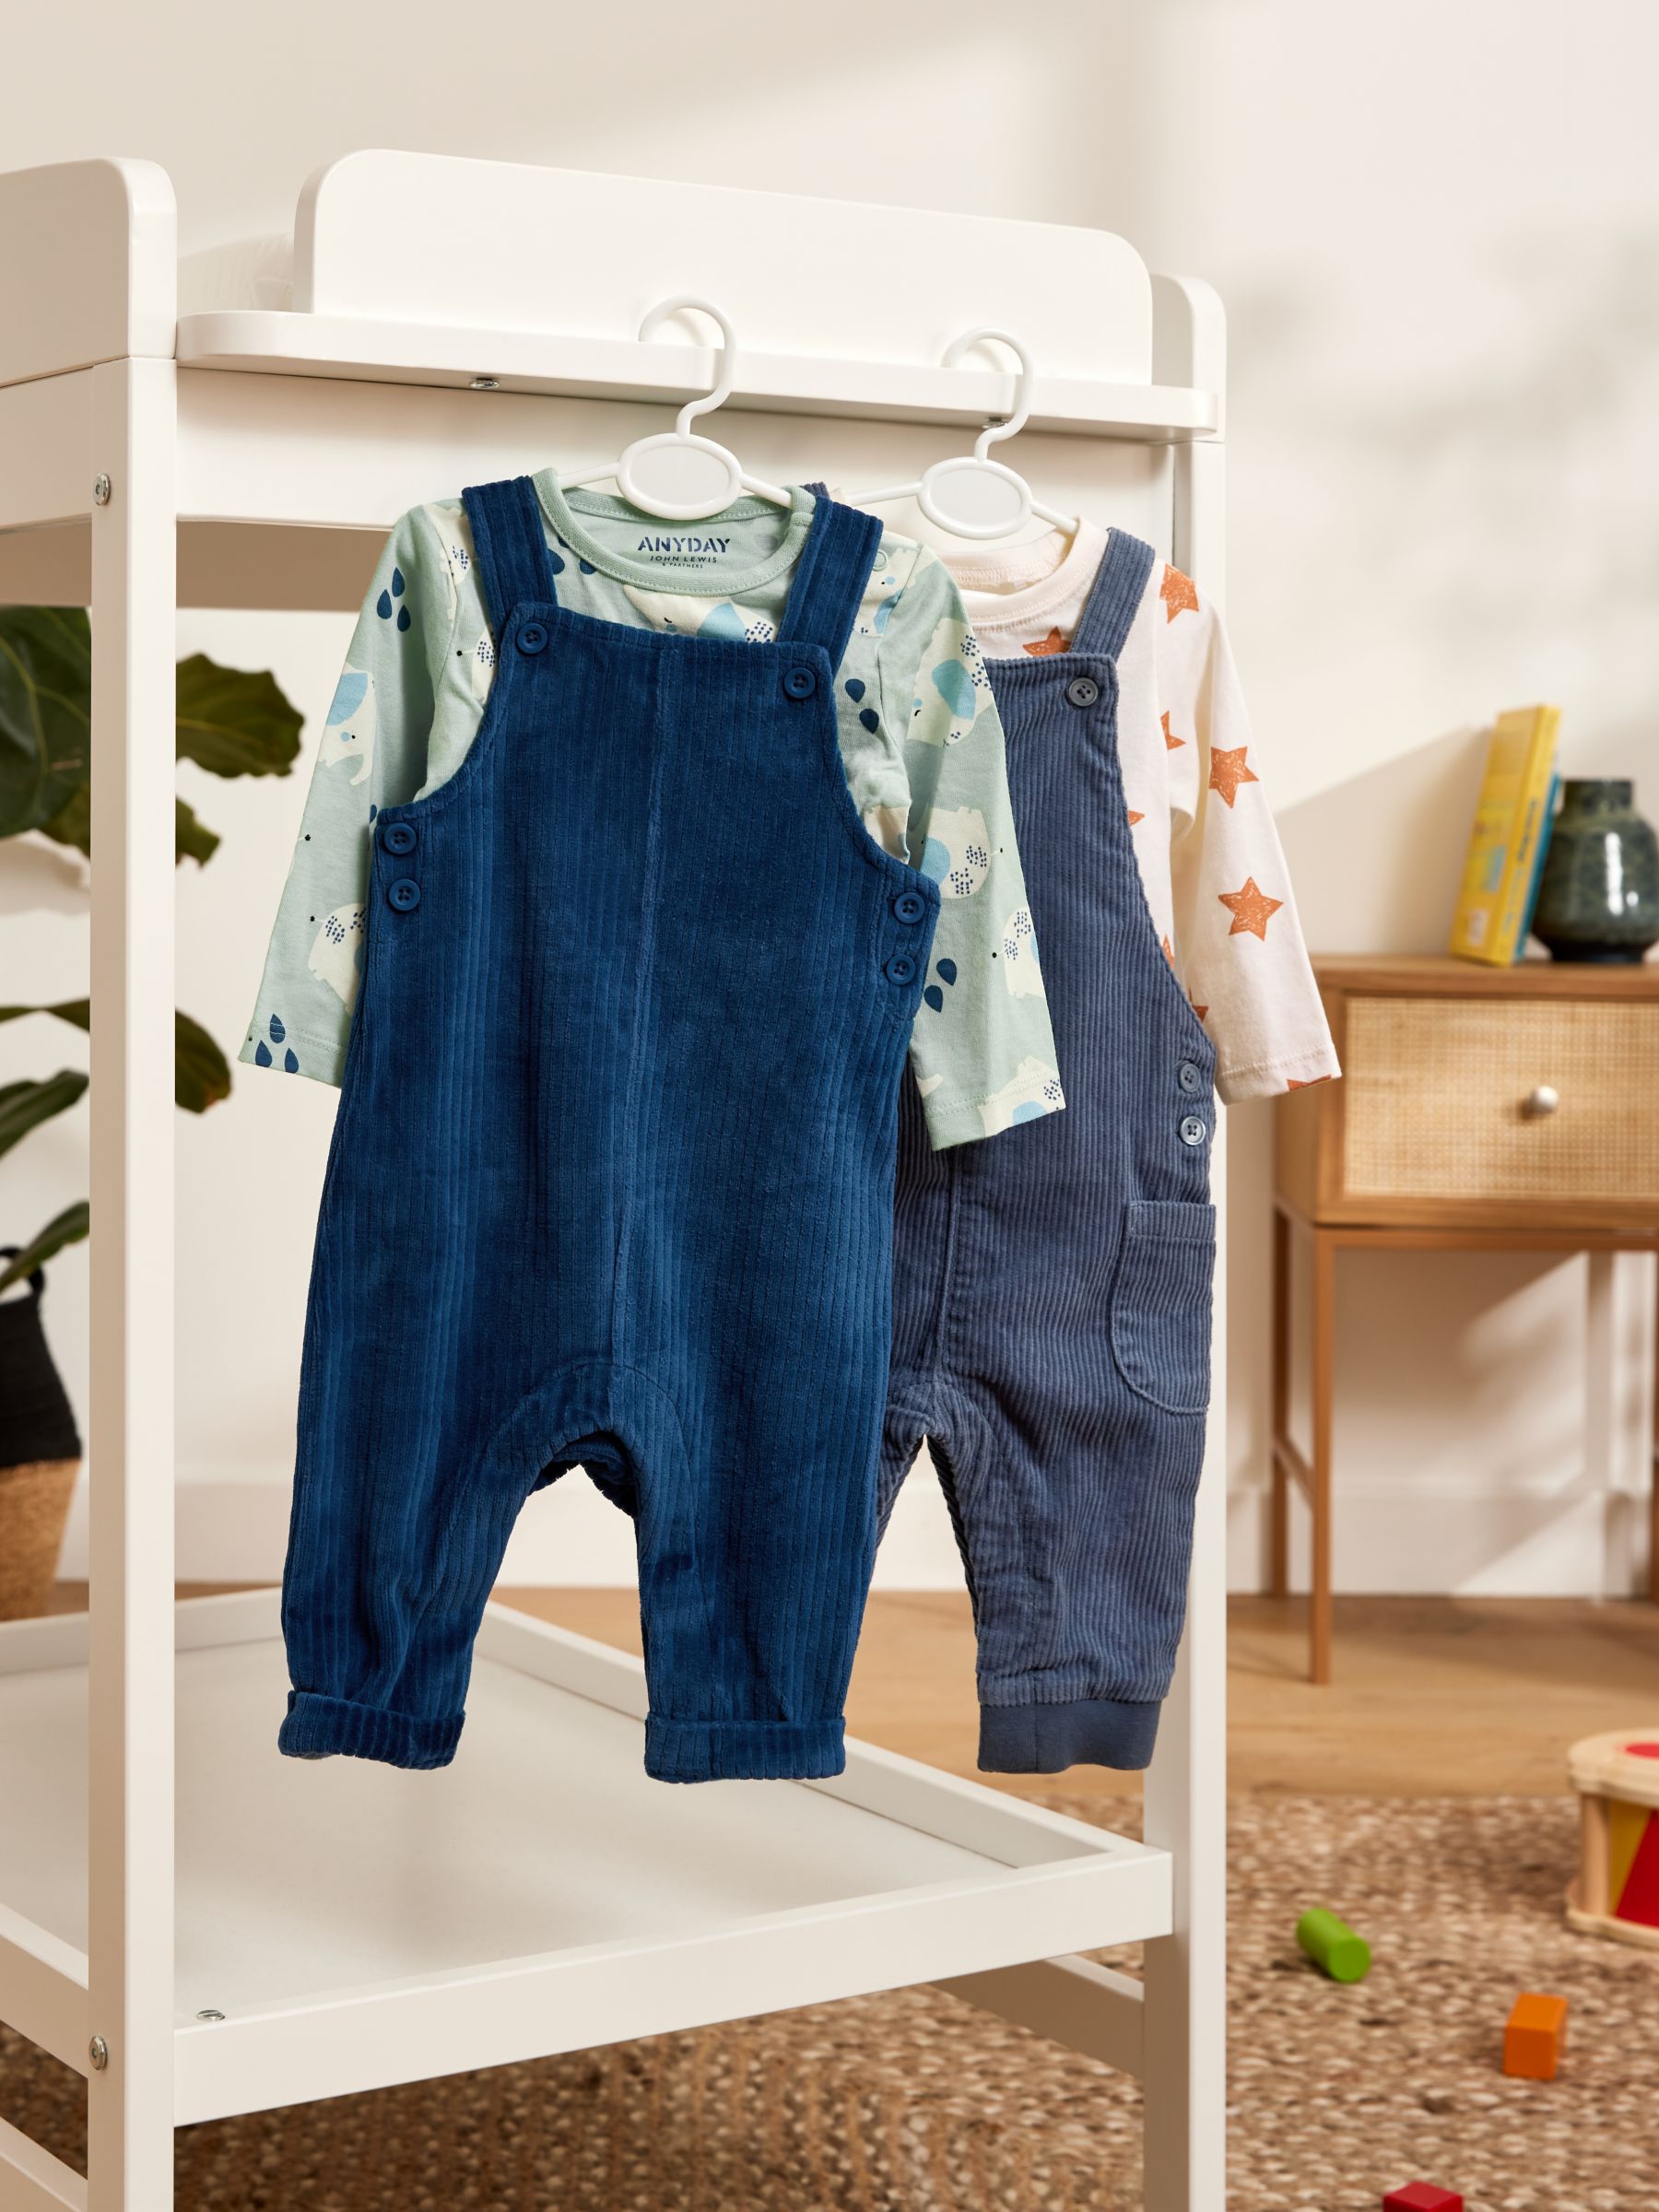 ANYDAY John Lewis & Partners Baby Elephant Top & Cord Dungarees Set, Multi, 12-18 months